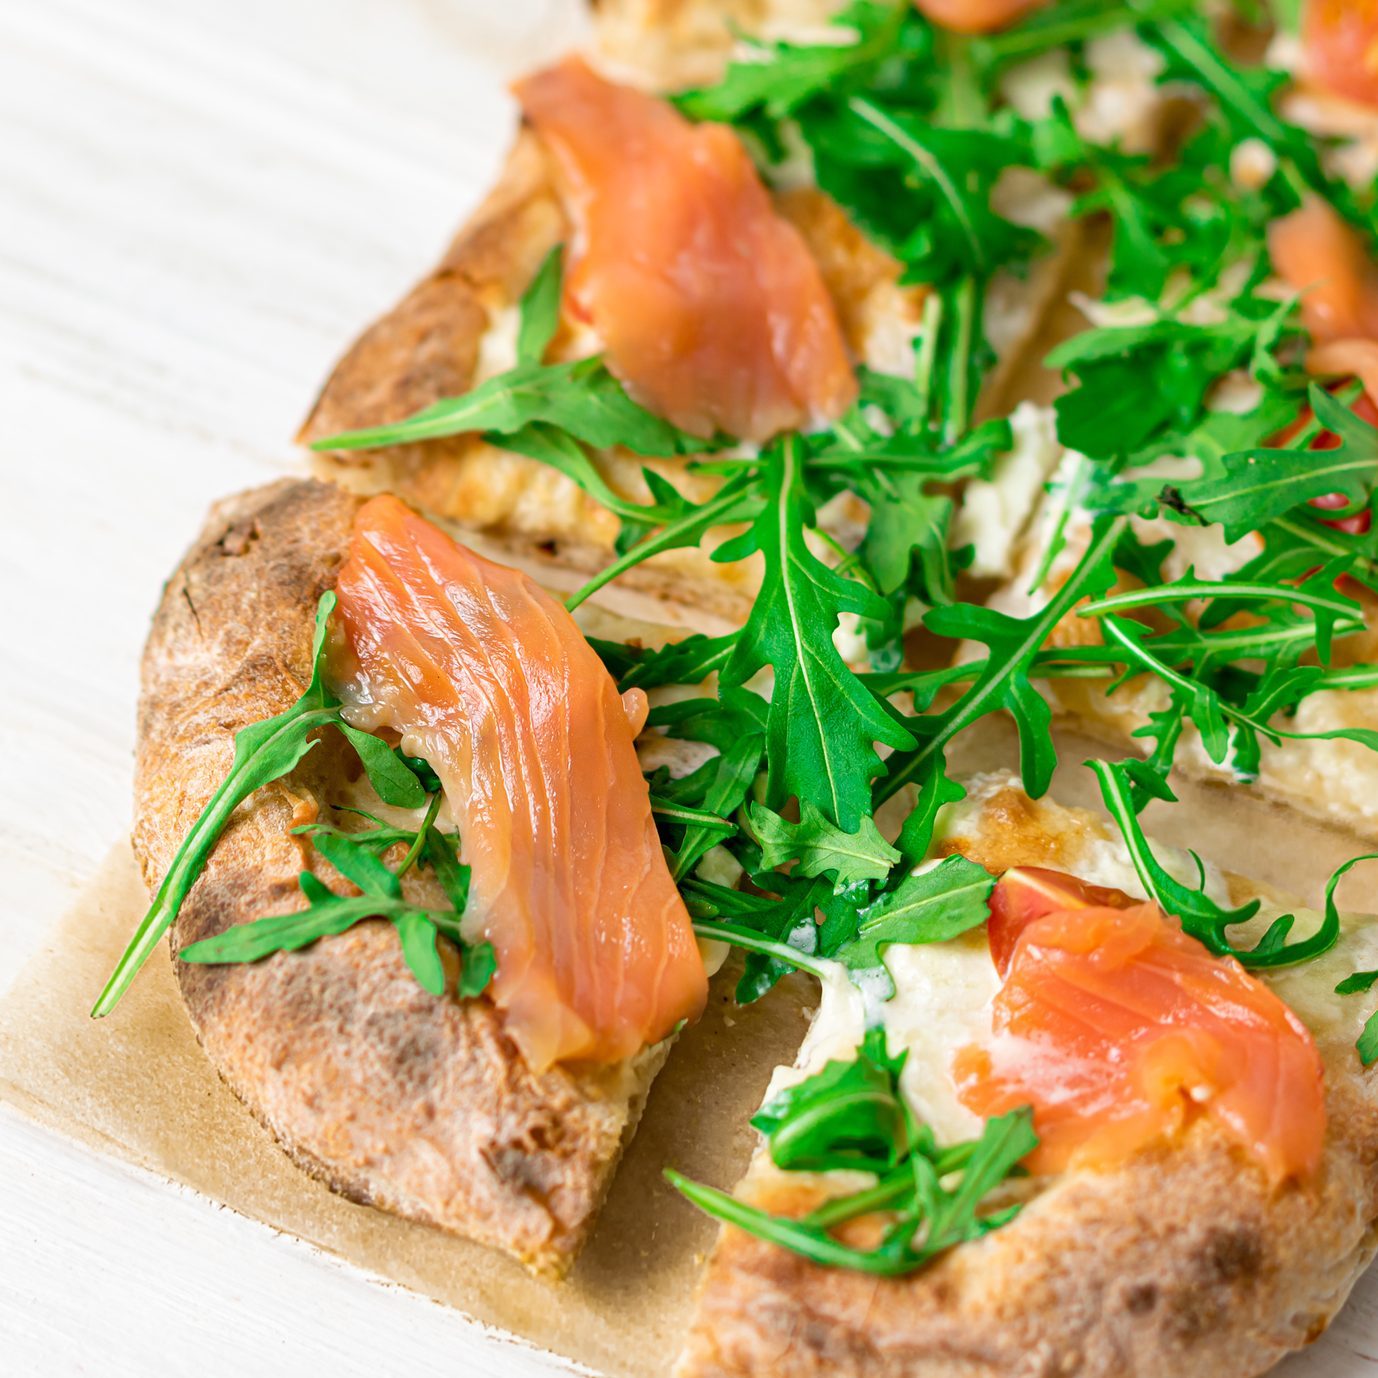 <p><span>Turn your favorite bagel into a pizza! Use cream cheese as the base, and load that dough up with smoked salmon, red onions and capers before finishing it with a spritz of lemon juice. I often sprinkle </span><a href="https://www.tasteofhome.com/collection/everything-bagel-seasoning/" rel="noopener"><span><span>everything bagel spice</span></span></a><span> onto this pizza, too, just for effect.</span></p>